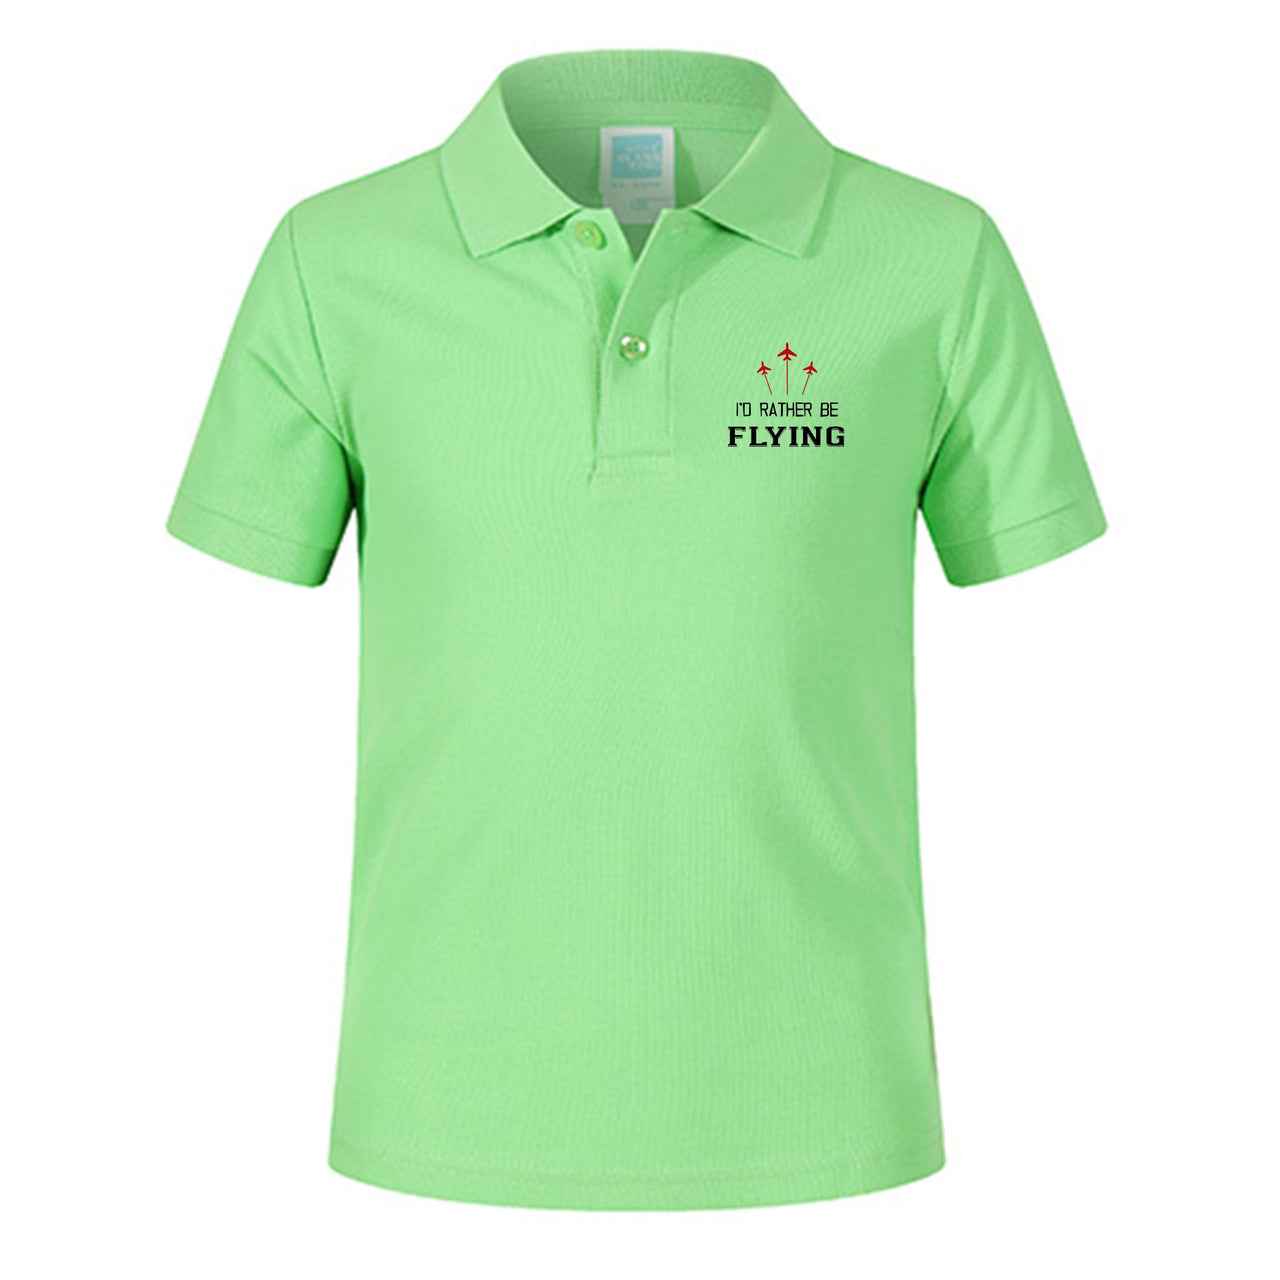 I'D Rather Be Flying Designed Children Polo T-Shirts